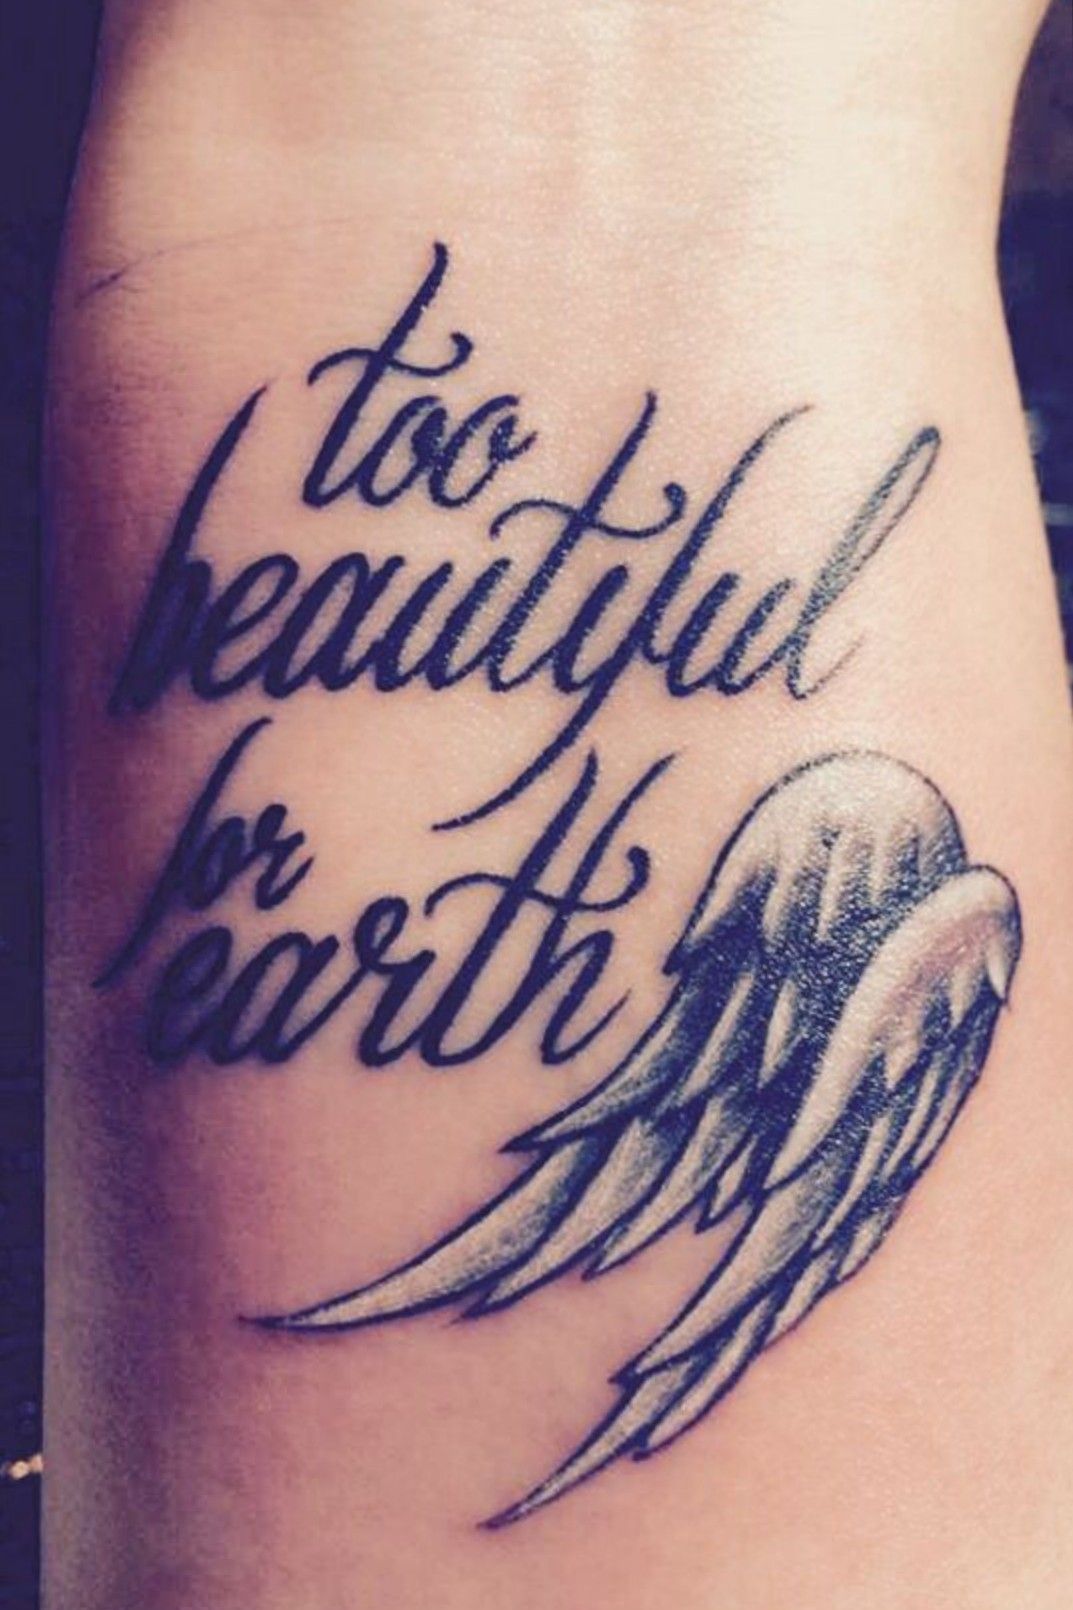 Too Beautiful for Earth  Butterfly tattoo Tattoos Infinity tattoo